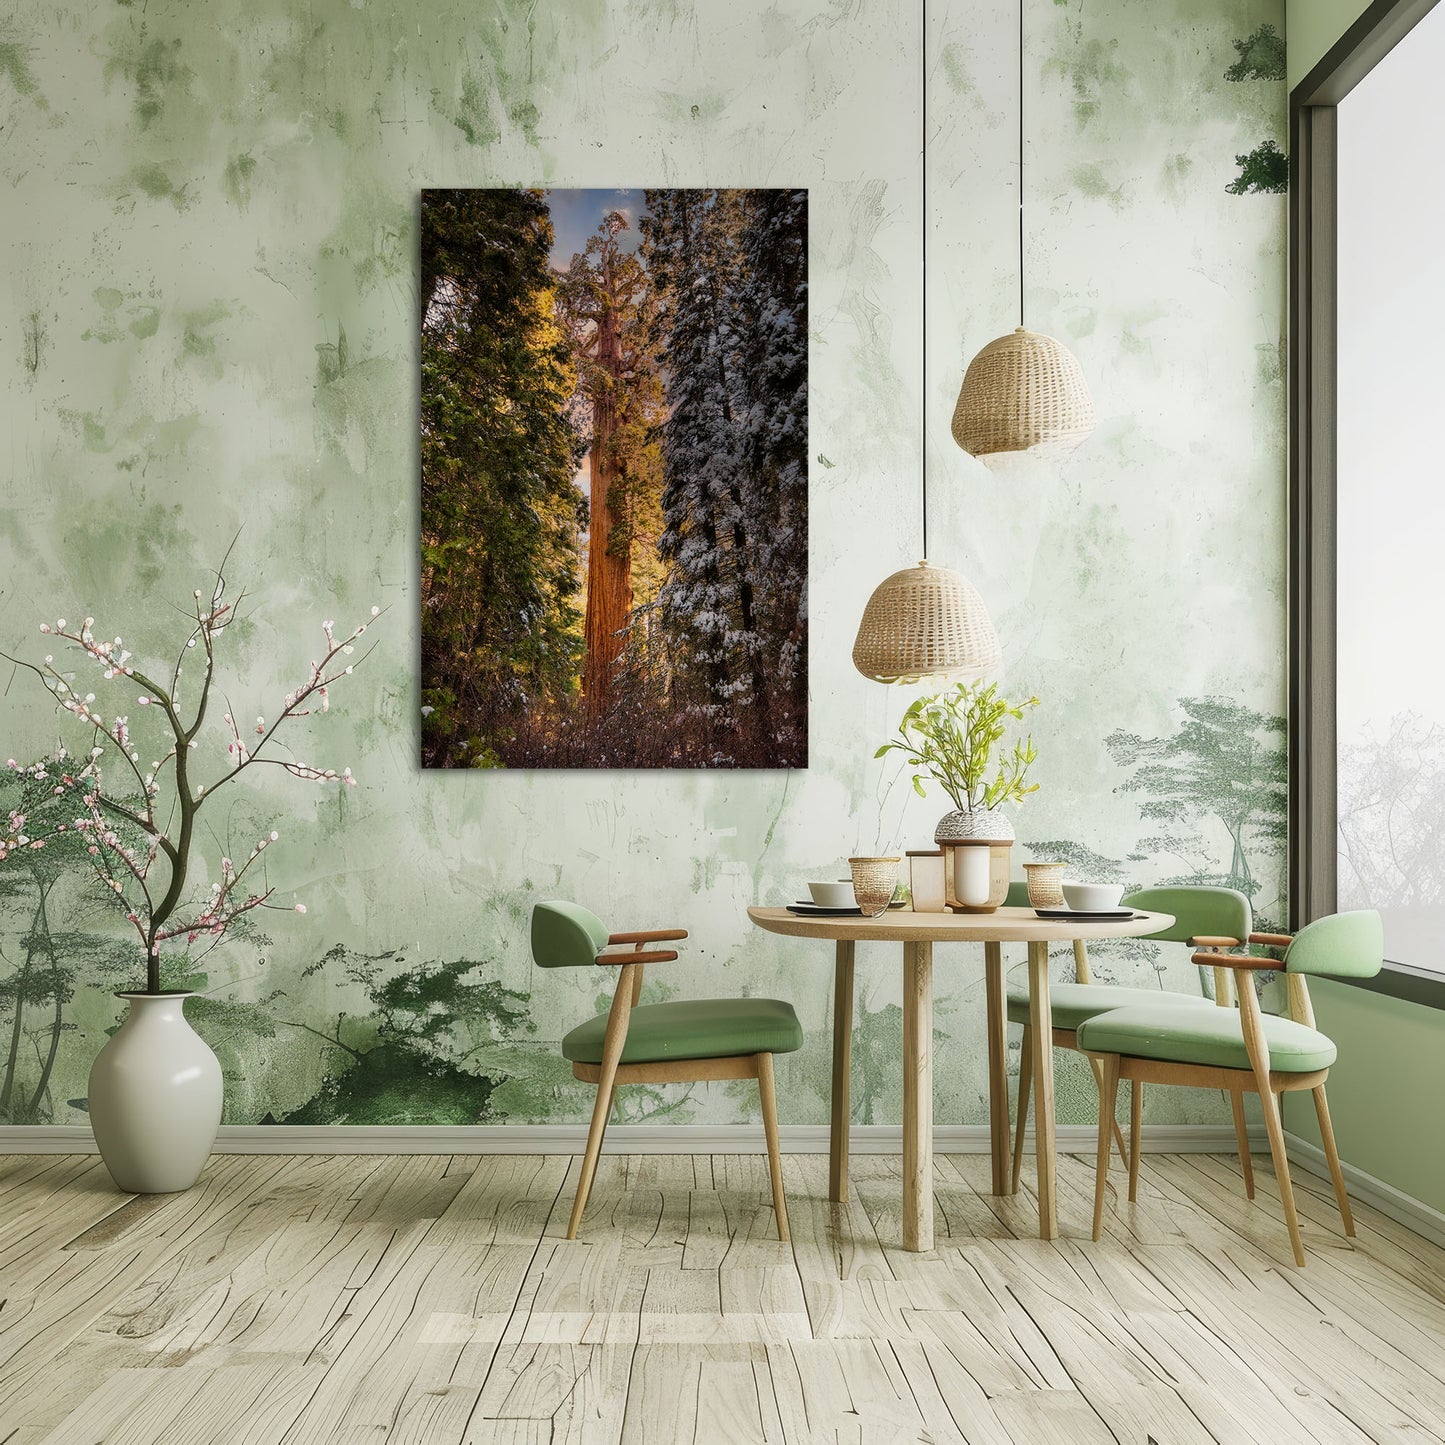 In a serene dining area with a rustic touch, a canvas of the Giant Sequoia from Grant Grove stands tall, its snow-dusted branches contrasting with the greenery around.